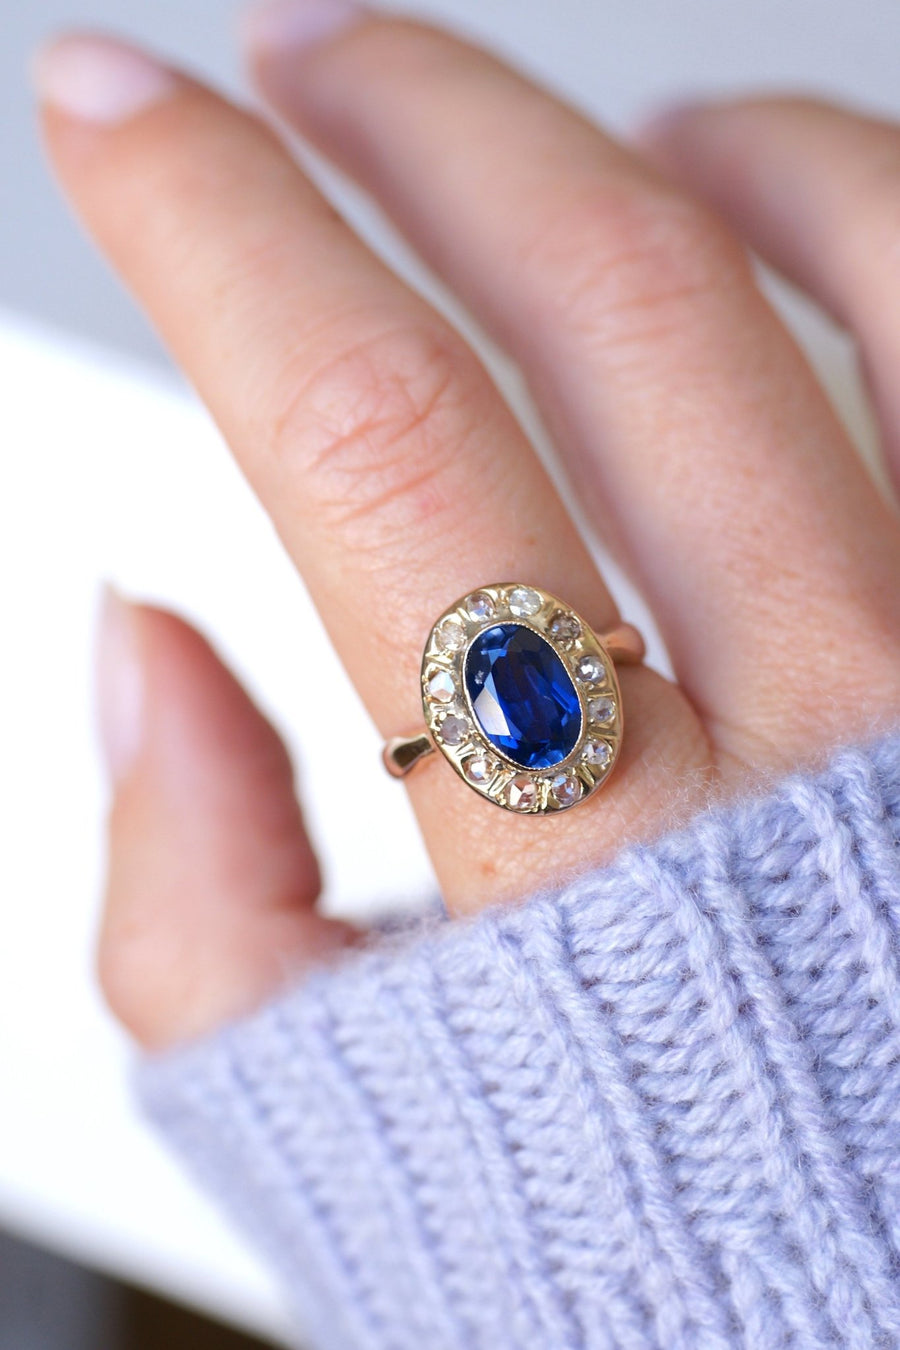 Antique synthetic sapphire and diamond engagement ring - Penelope Gallery